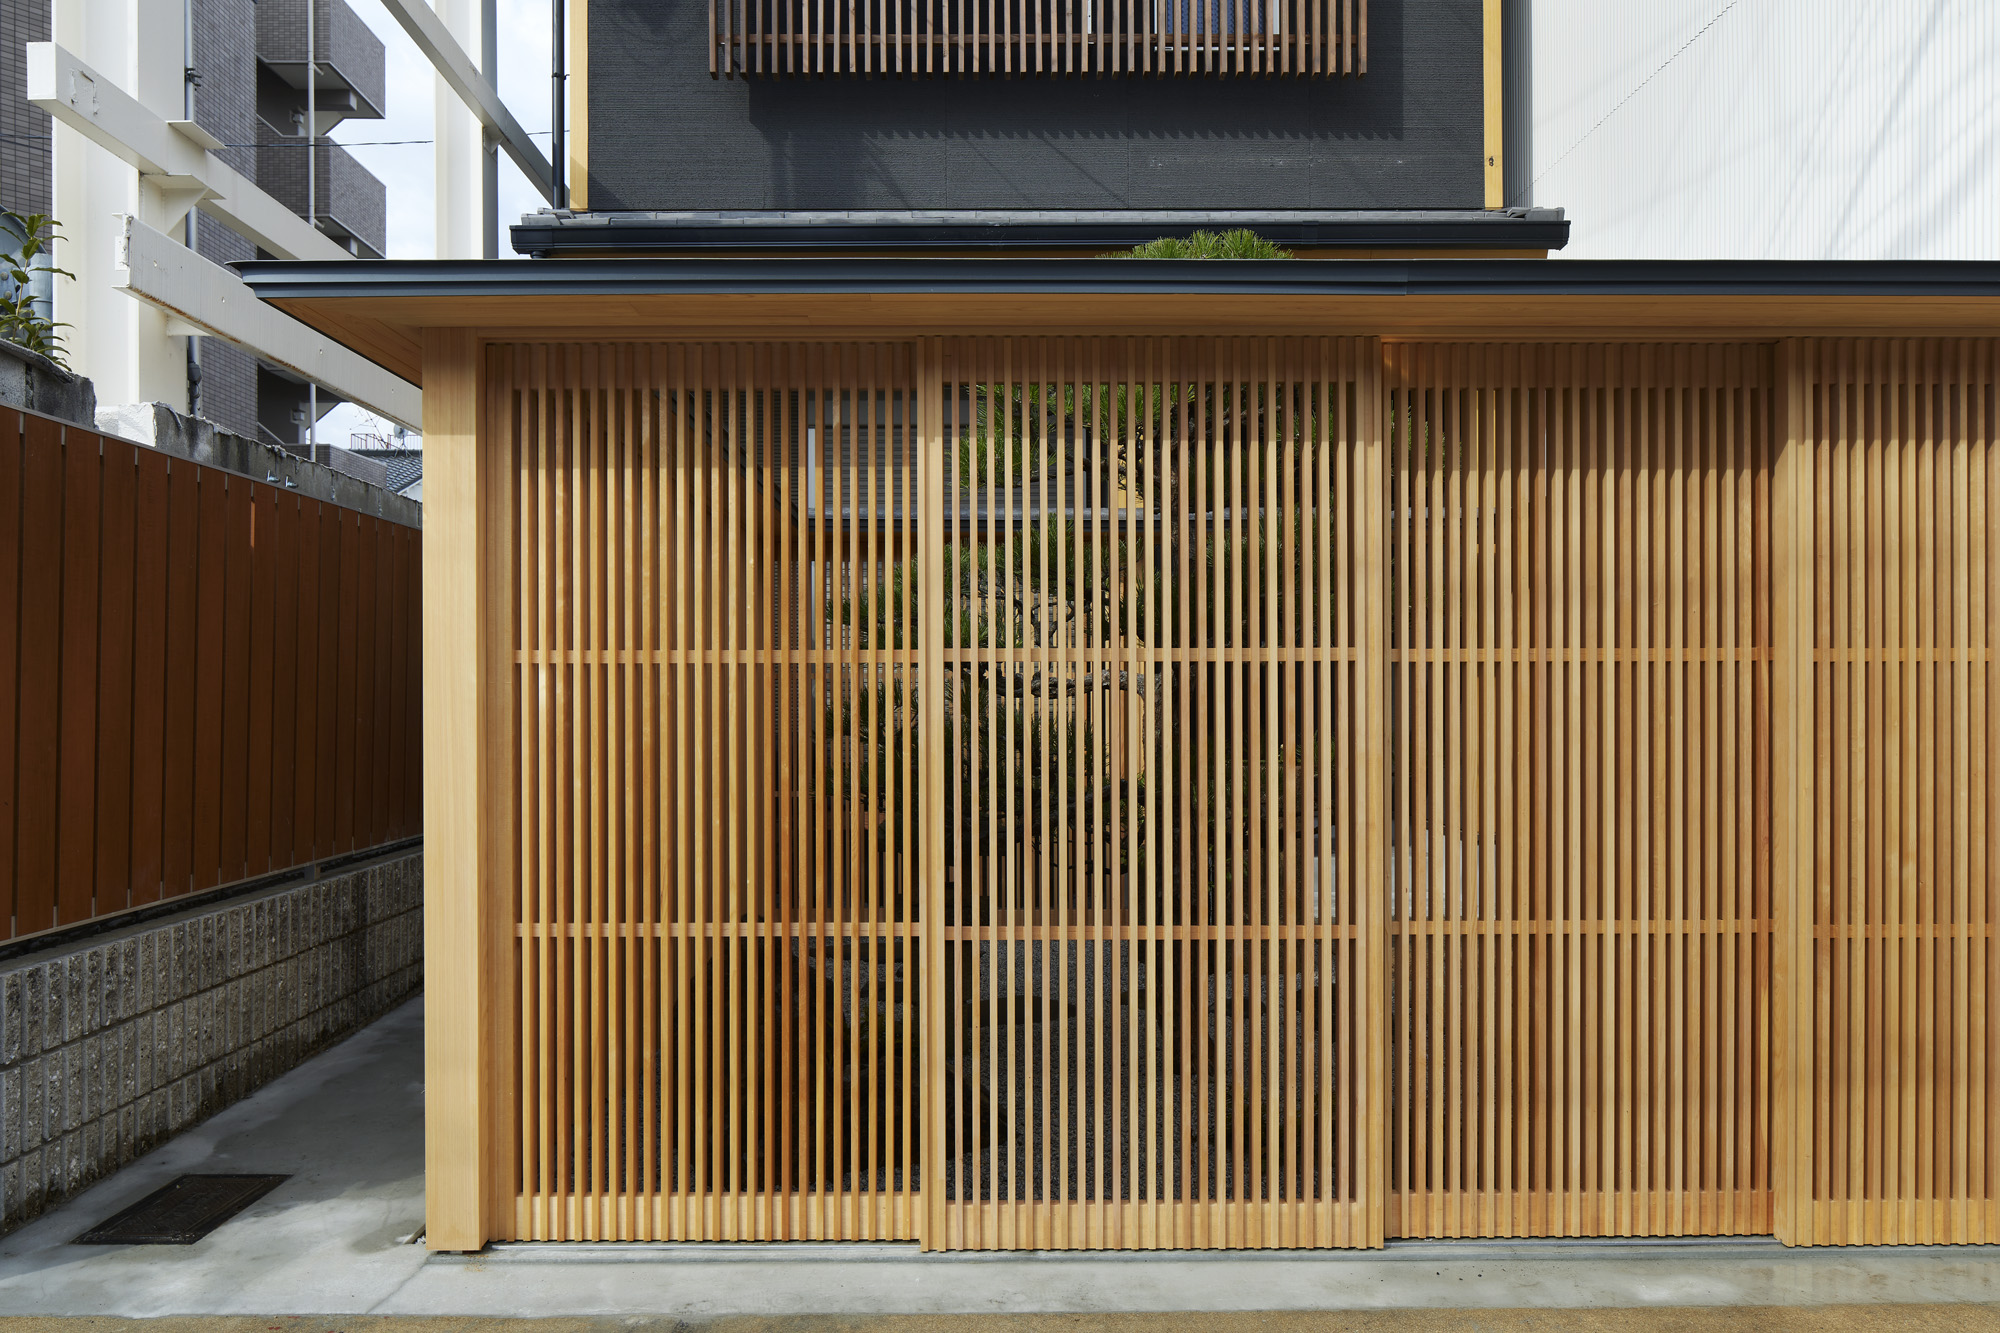 
Enclosed fence in Kyoto puts the residence’s living environment together, while serving as a gate and a backdrop of the front garden. The existing house has a frontage of 5m wide and 4.5m deep, and the space was enough for two carparking. The clients needed however no parking space, instead they would rather have a Japanese garden. They wished also to change the whole image of the existing exterior and the house by renovating this frontage into an attractive approach.

First, we planned a square-shaped enclosure in the existing open space with latticed sliding doors and gave different characters to the inside and the outside. Inside the fence you can arrange a garden like a tsubo-niwa, and the outside serves to keep the space neat and tidy; items such as bicycles, outdoor units, and cleaning tools that are necessary but not compatible with the beauty of the garden can be stored behind and they can be easily taken out for everyday use.

From this squared fence, eaves come out all around. Having the size of a roof ridge cap, the eaves keep the water out of wooden lattice, being made seamlessly of a sheet of galvanized steel. Seen from the street, the fence looks like a small building with its eaves almost resembling a roof. It softens a solitary image of the house front and creates a group of living environments in which the house, new fences, gardens, existing fences, mailbox, etc. are connected with each other. Thus, without major refurbishment of the main building itself, we could change the quality of the whole environment.

In addition to those architectural issues above, we propose a prototype as solution for the conflict between traditional cityscape of Kyoto and its current building regulations. Although Kyoto is known for its historical wooden buildings densely settled, modern urban fire prevention doesn’t allow wooden gate more than 2m high to be built. To achieve wooden space with wooden joinery, which is difficult in fire protection area, the height of the fence is kept lower than 2m, so that we could avoid installing fireproof sleeve walls additionally.

Each side of the fence has a span of 3.64 m with its height maximal 2 m, with 3/10pitched roof on top. And the wood is not treated non-combustible. In order to satisfy all of these, the columns and beams are made of steel. By using T-beam, the cross-sectional performance and shape of the beam are matched with the the roof, while the installation of the base material being kept compact and reasonable. This could be a general solution for similar conditions, as it is normally difficult to realize wooden fence with gabled roof in the urban area of Kyoto.

translated by Tota Goya